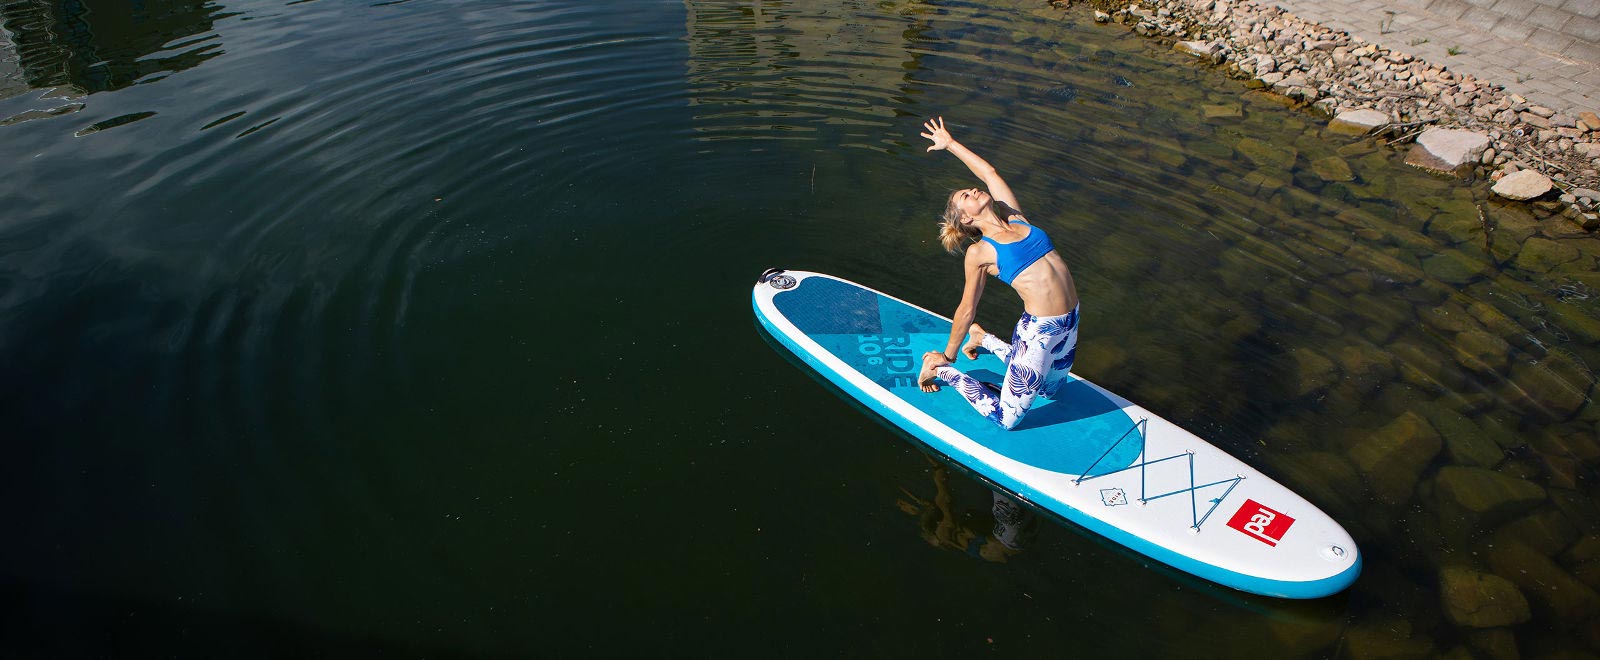 Woman makes yoga exercise on SUP board near the shore under water a few stones are visible